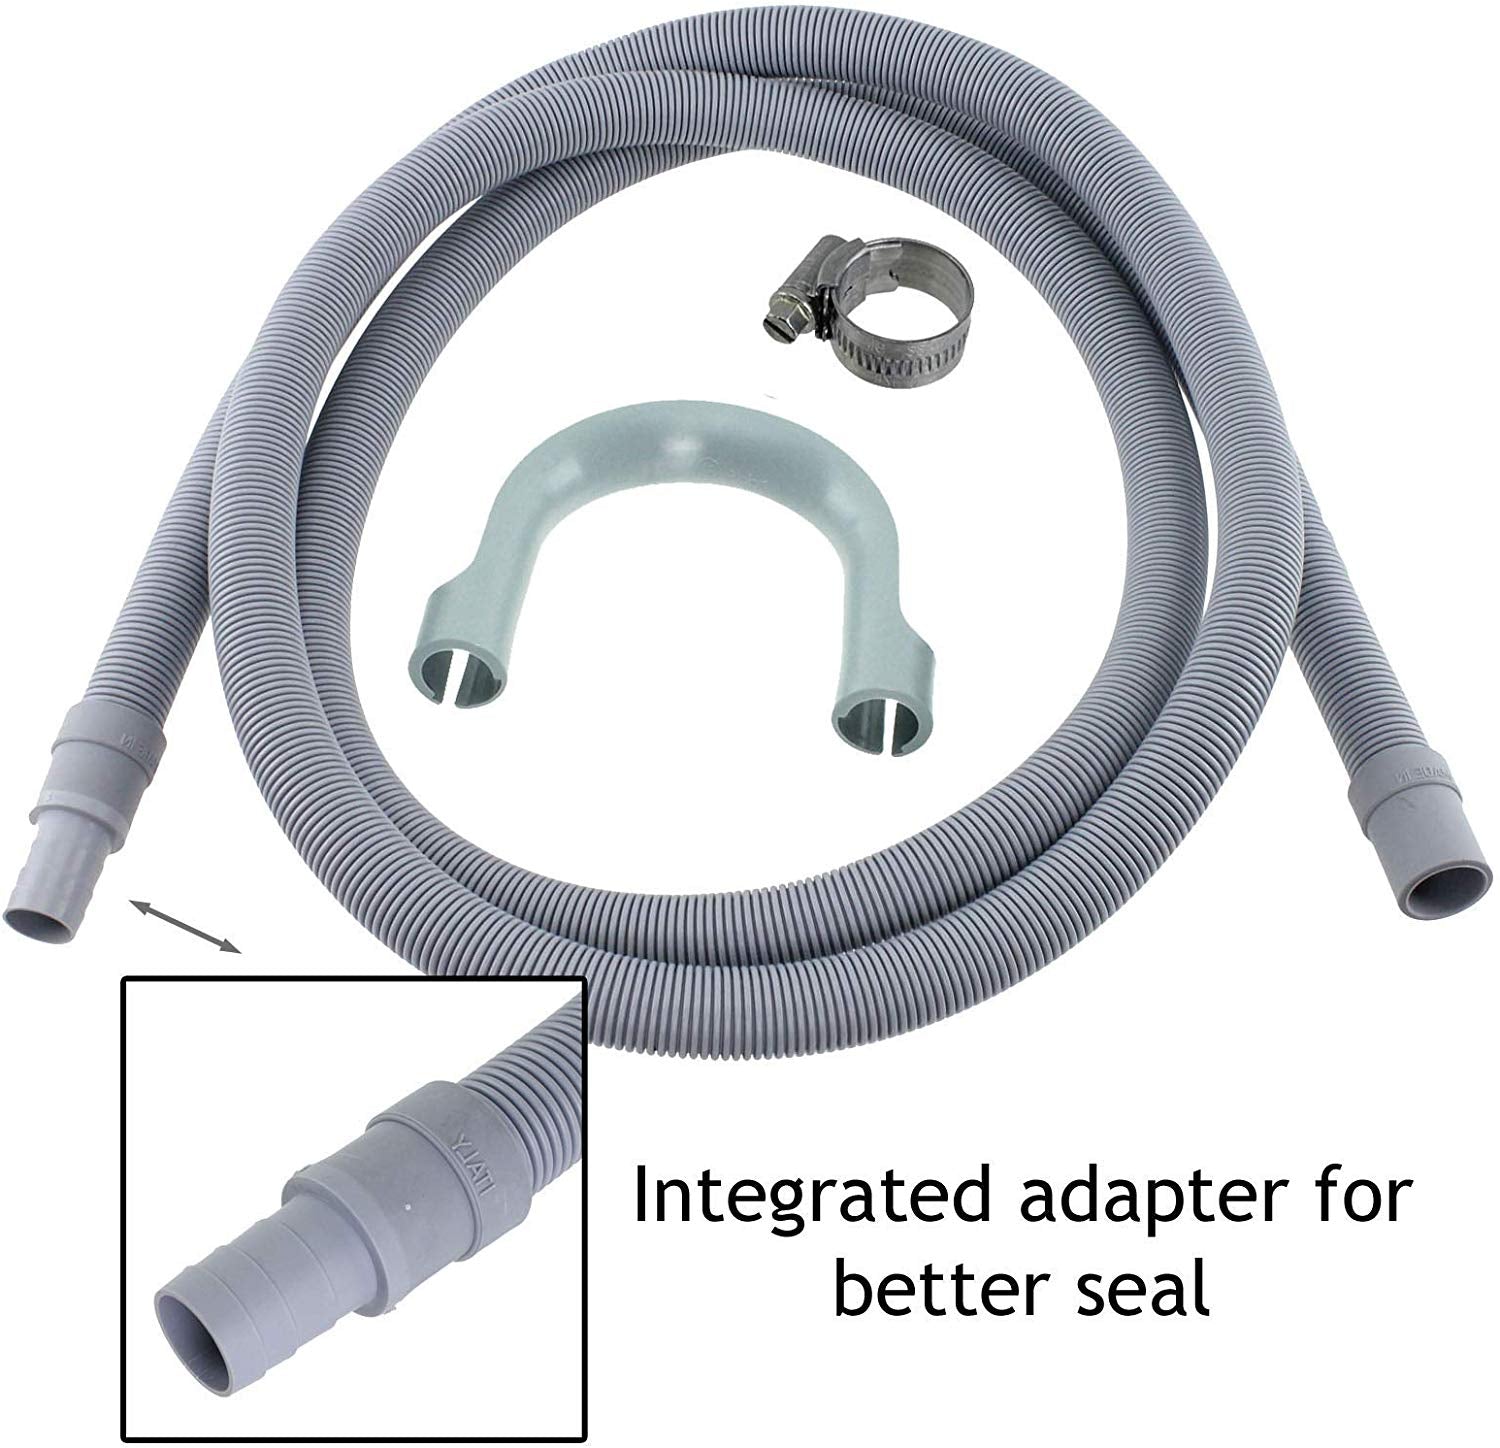 Drain Hose Extension Pipe Kit for Miele Washing Machine Dishwasher (2.5m, 19mm / 22mm)